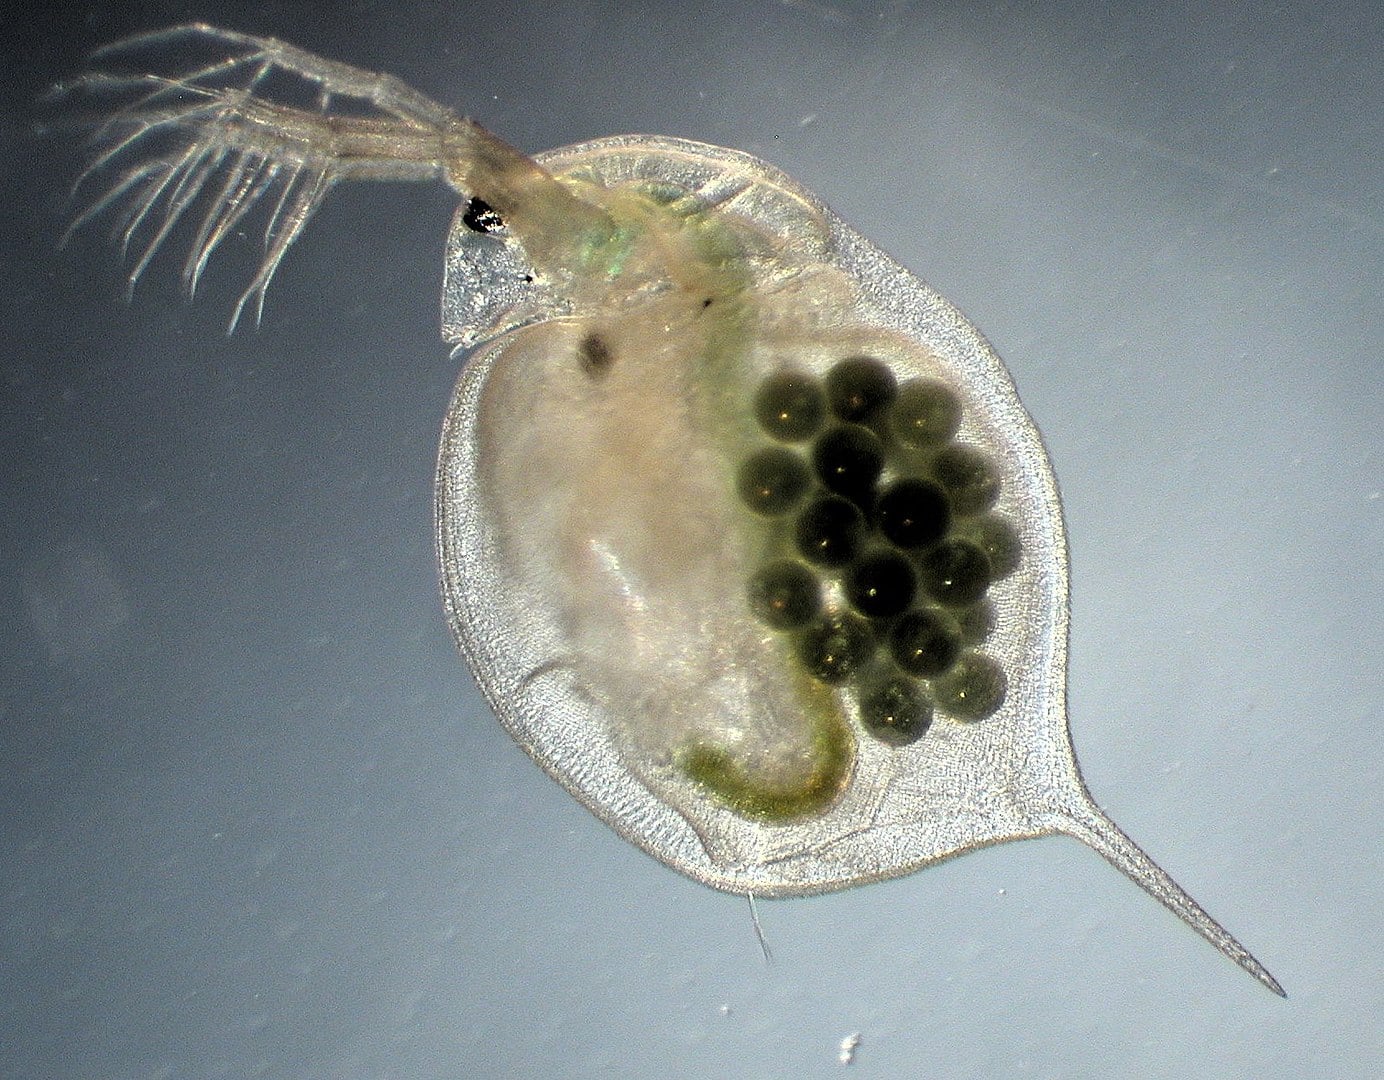 Scientists use water fleas to clean chemicals from waterScientists have discovered a method to harness Daphnia, one of the several small aquatic...